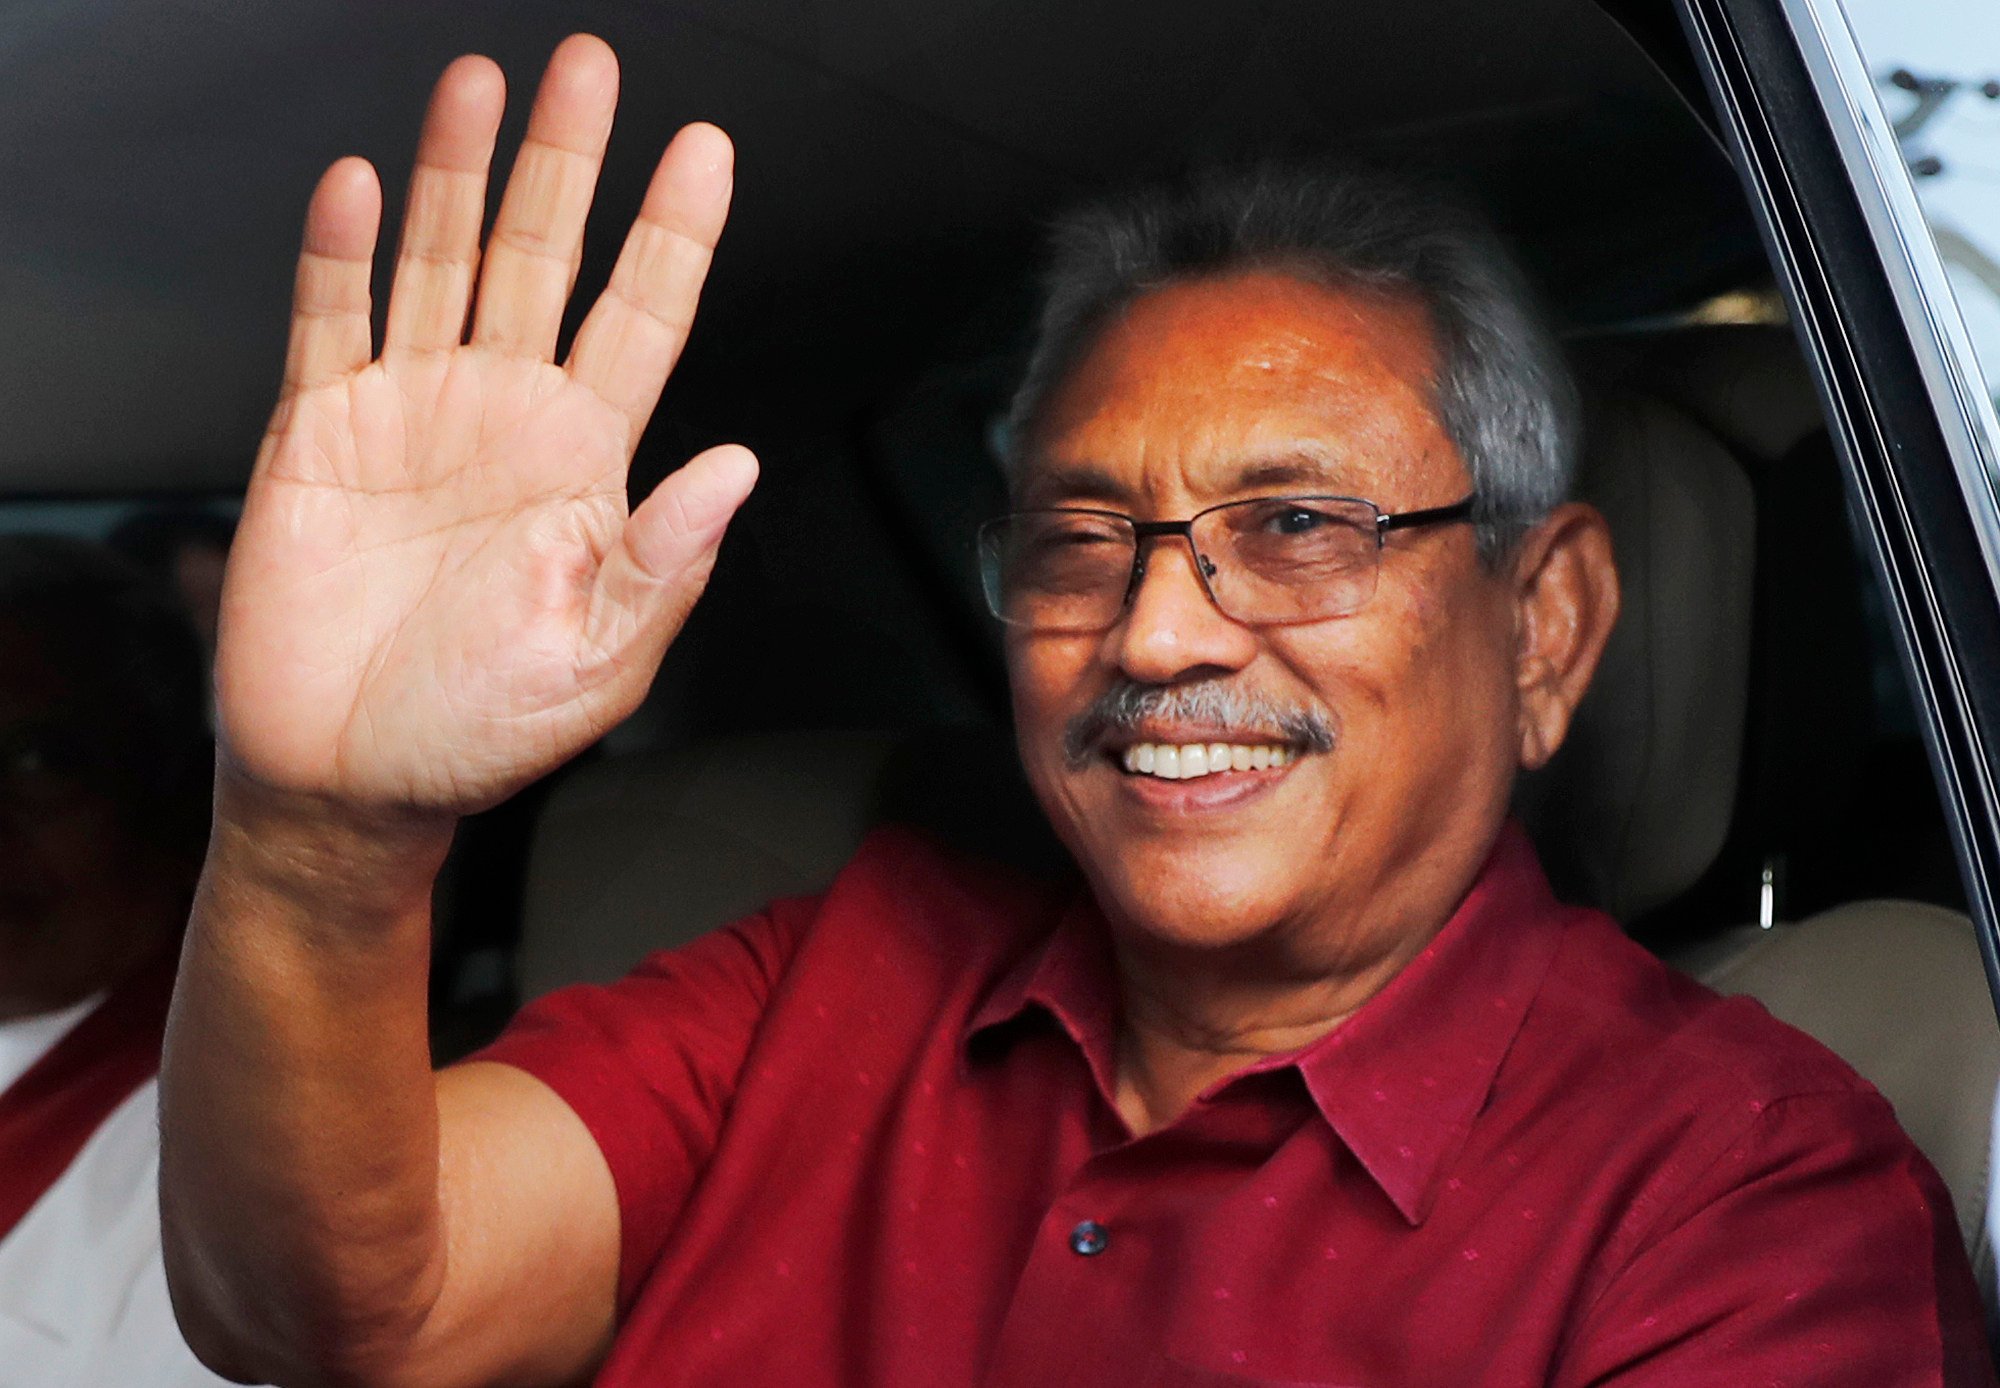 Sri Lanka’s former president Gotabaya Rajapaksa claims that Chinese investments in the country led to his ouster. Photo: AP